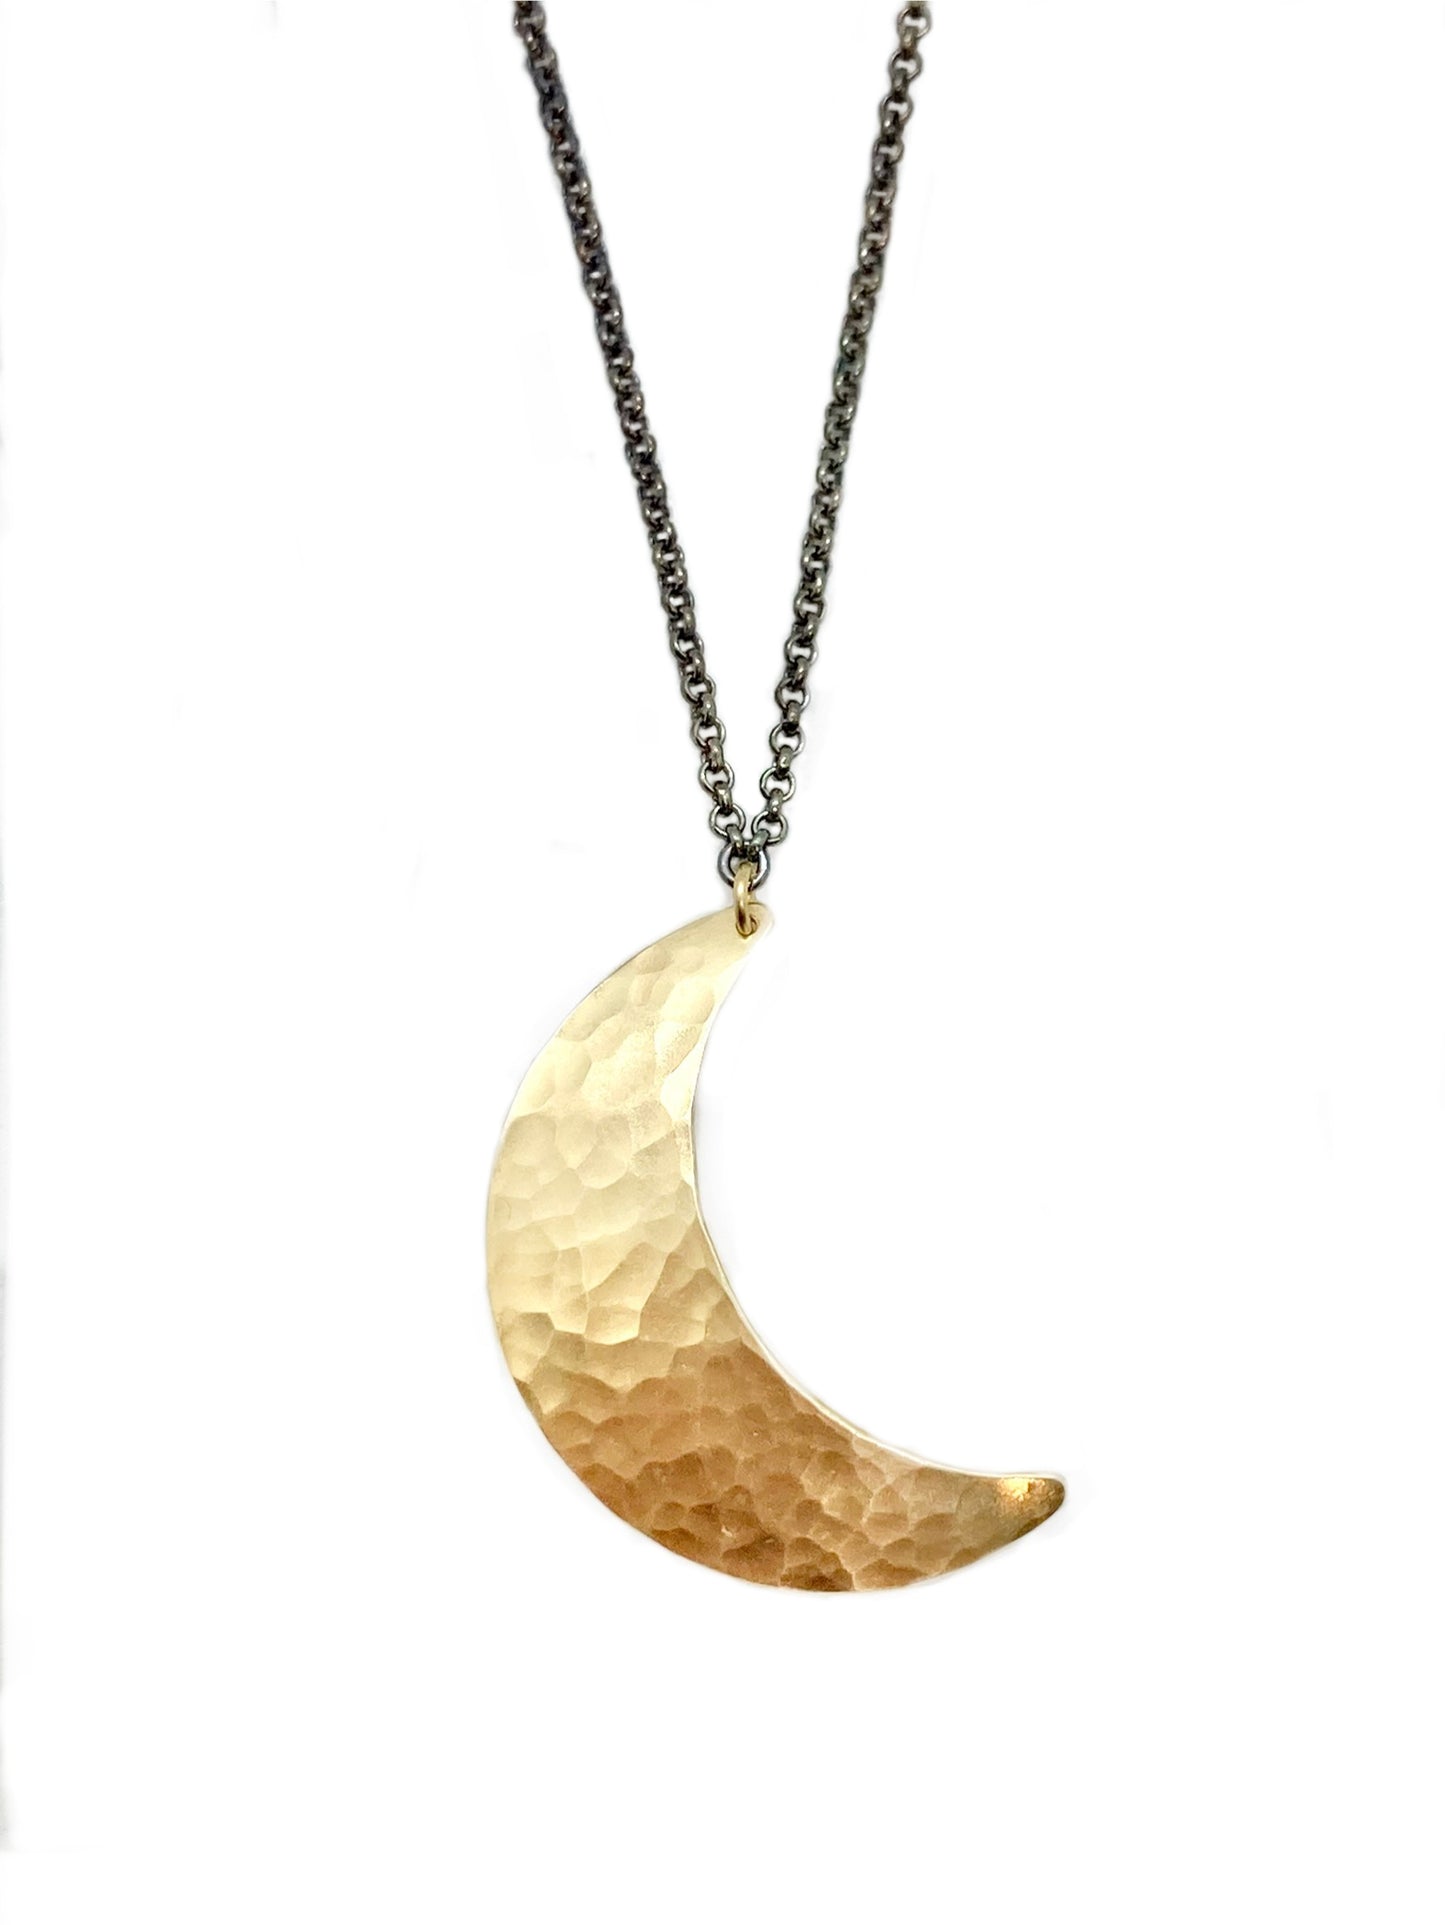 Crescent Moon Necklace in Brass | Moon Phase Necklace